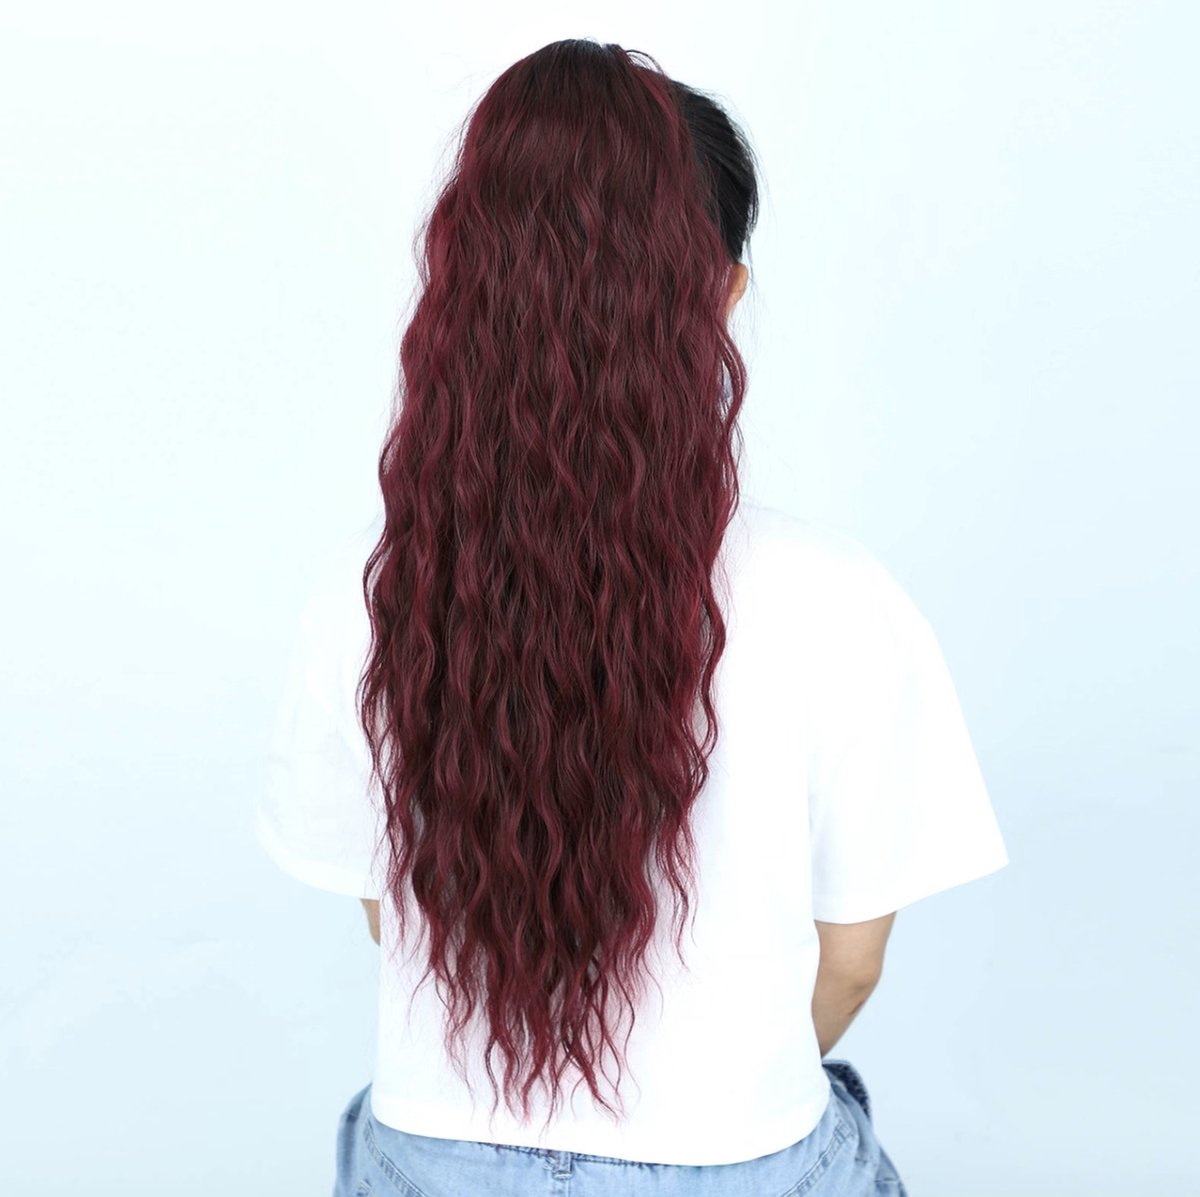 Miss Ponytails - Beachwave ponytail extentions - 26 inch - Bordeaux 118 - Hair extentions - Haarverlenging